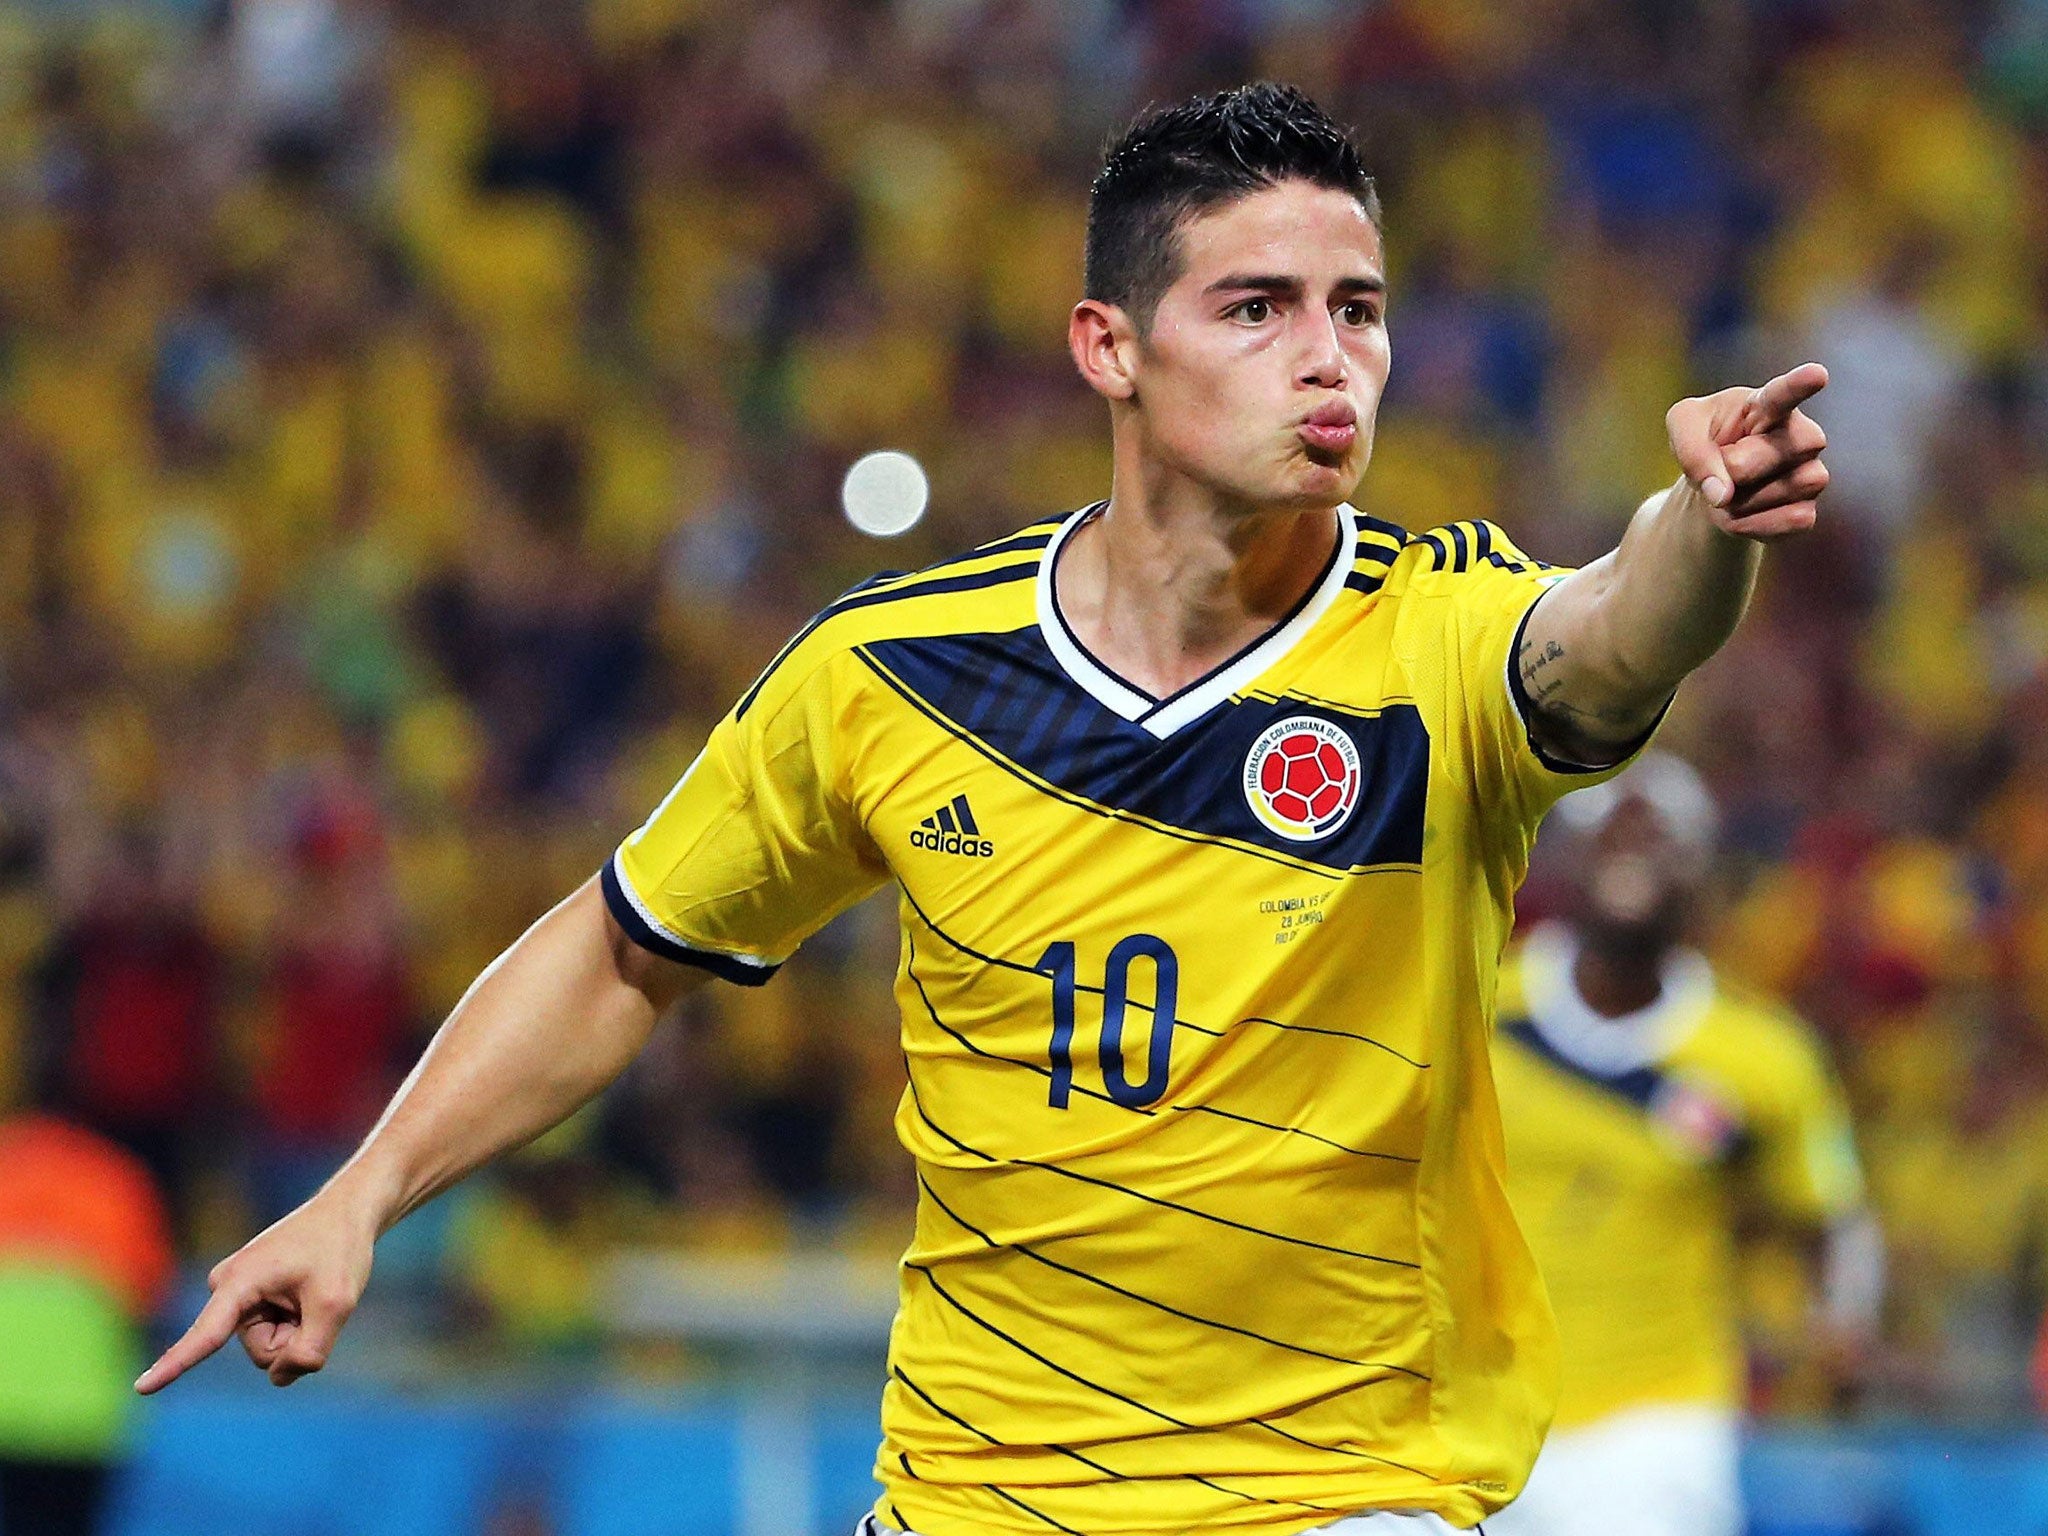 Brazil vs Colombia World Cup 2014 preview: Five reasons why Brazil